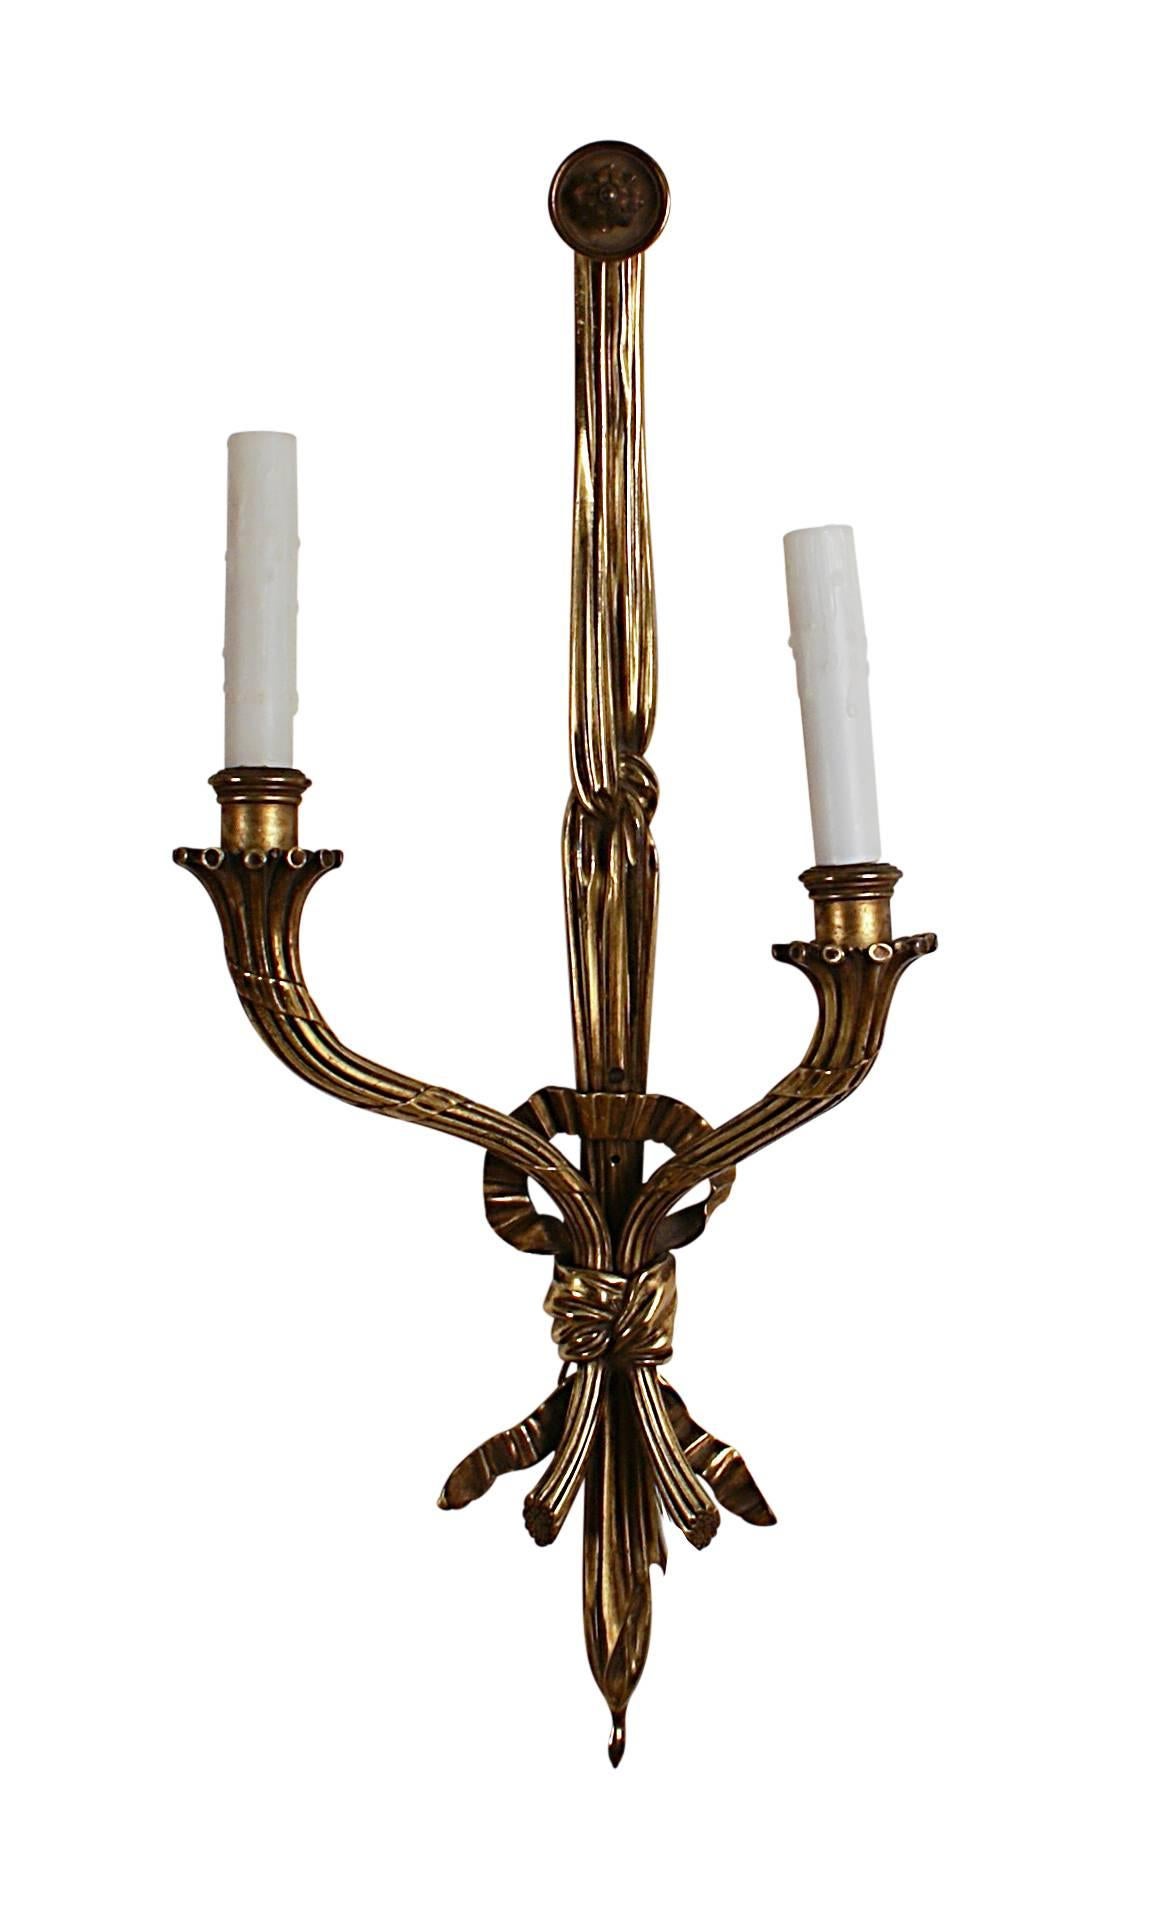 Gold French Louis XVI Style Gilt Bronze Sconces Wired for Lighting, circa 1870